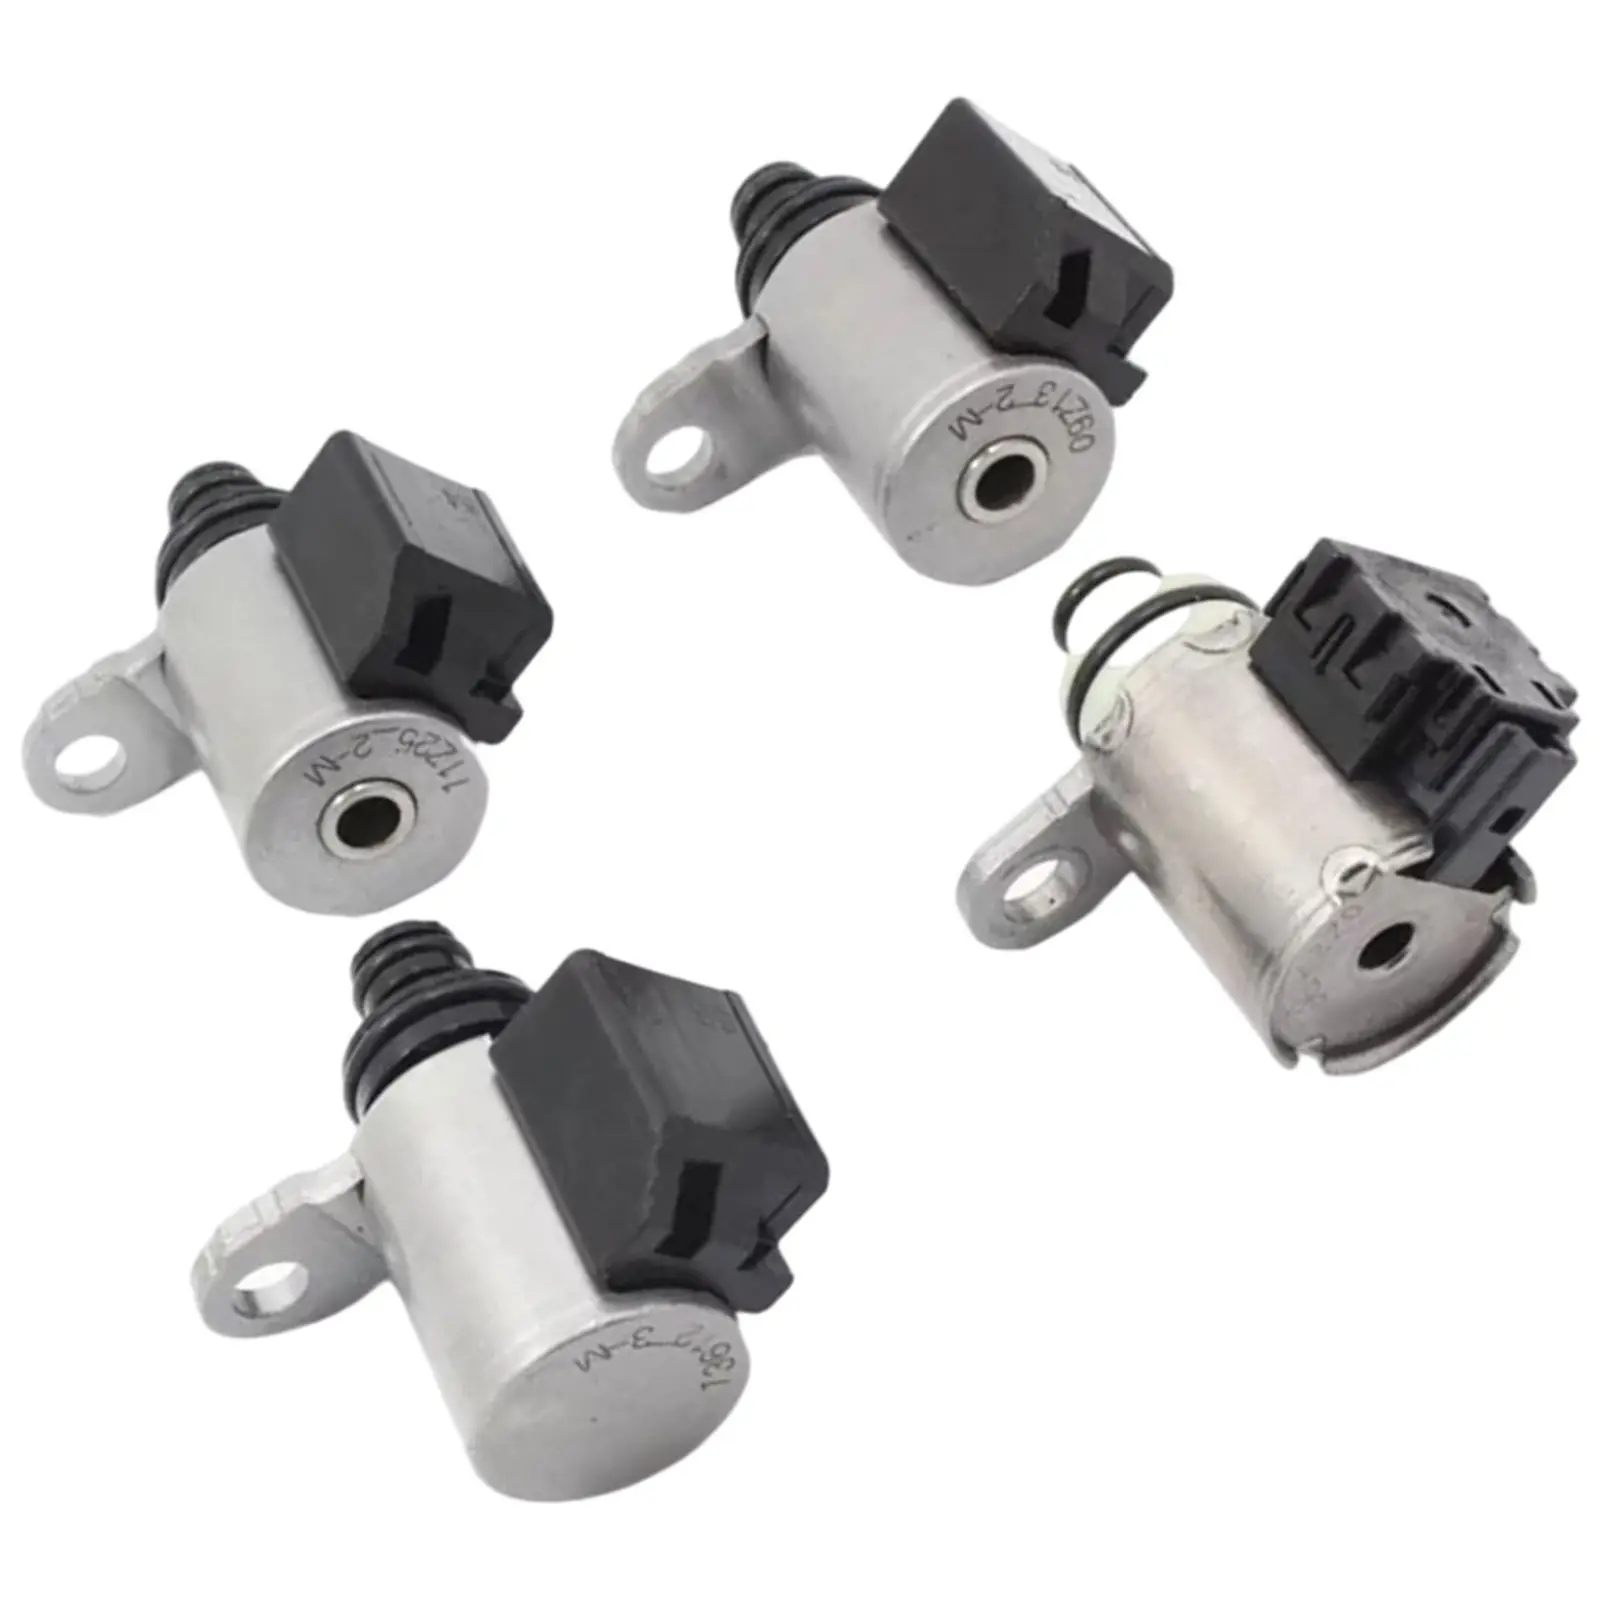 4Pcs Transmission Valve Solenoid Kit for   Rogue 09-12 RE0F10A JF011E Replacement Parts Accessories